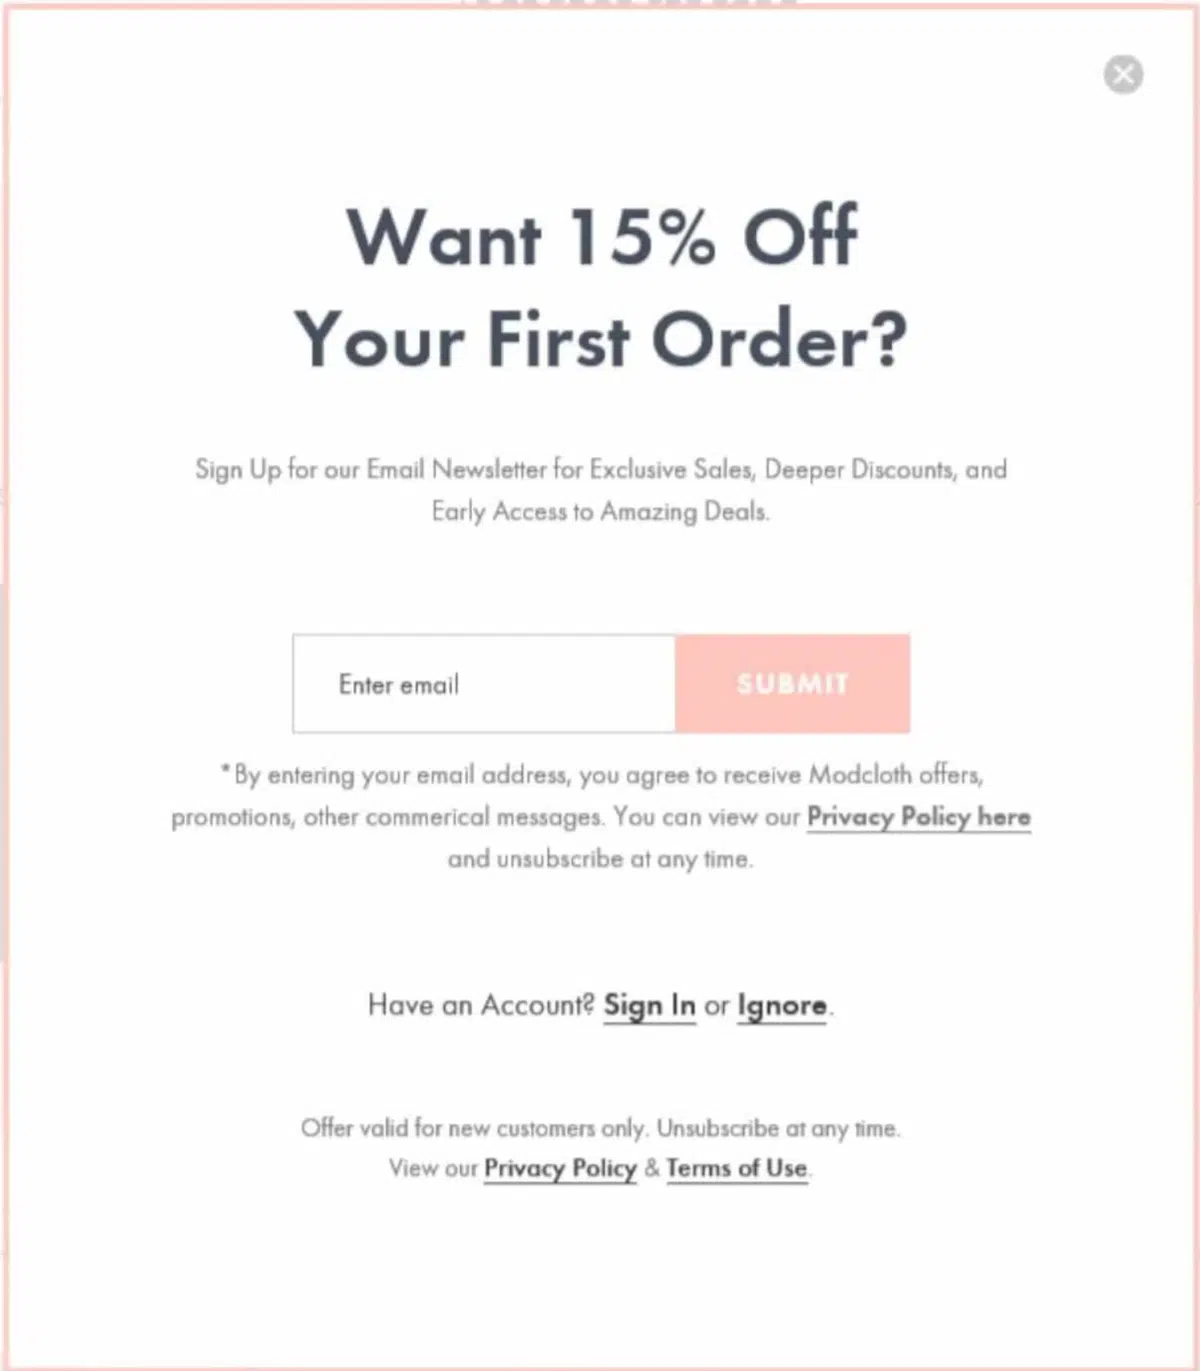 an example of how to build an email list with a popup offering 15% off first order with email signup 